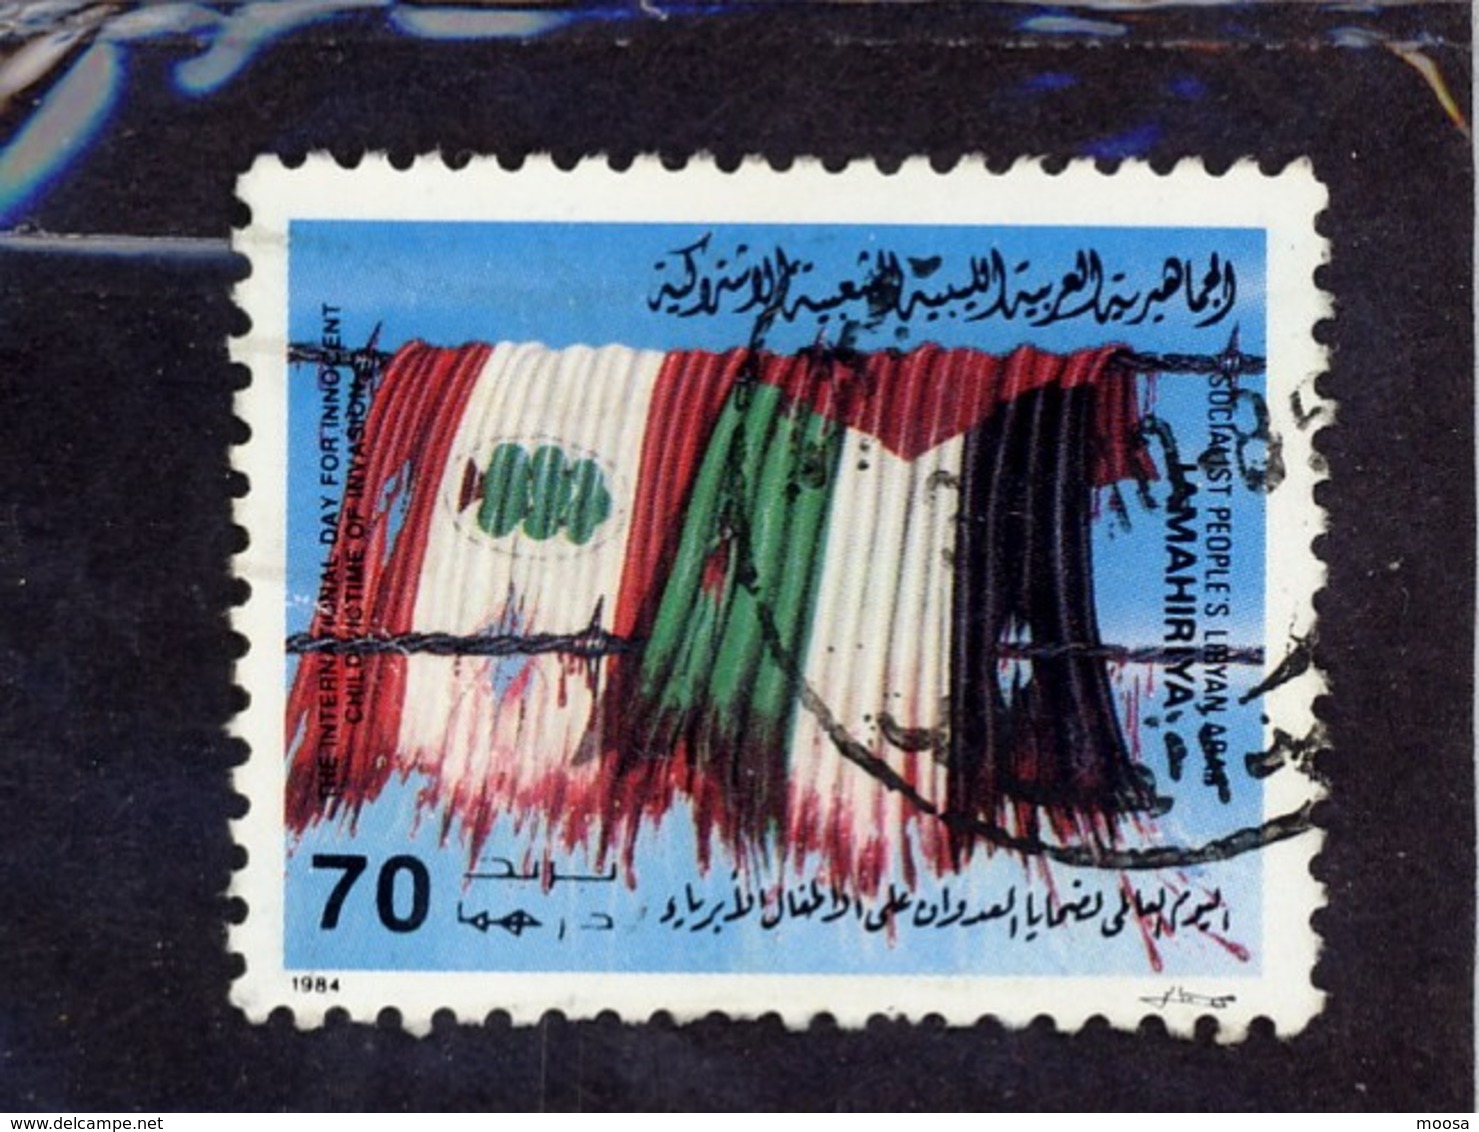 (Free Shipping*) USED STAMP - Libia